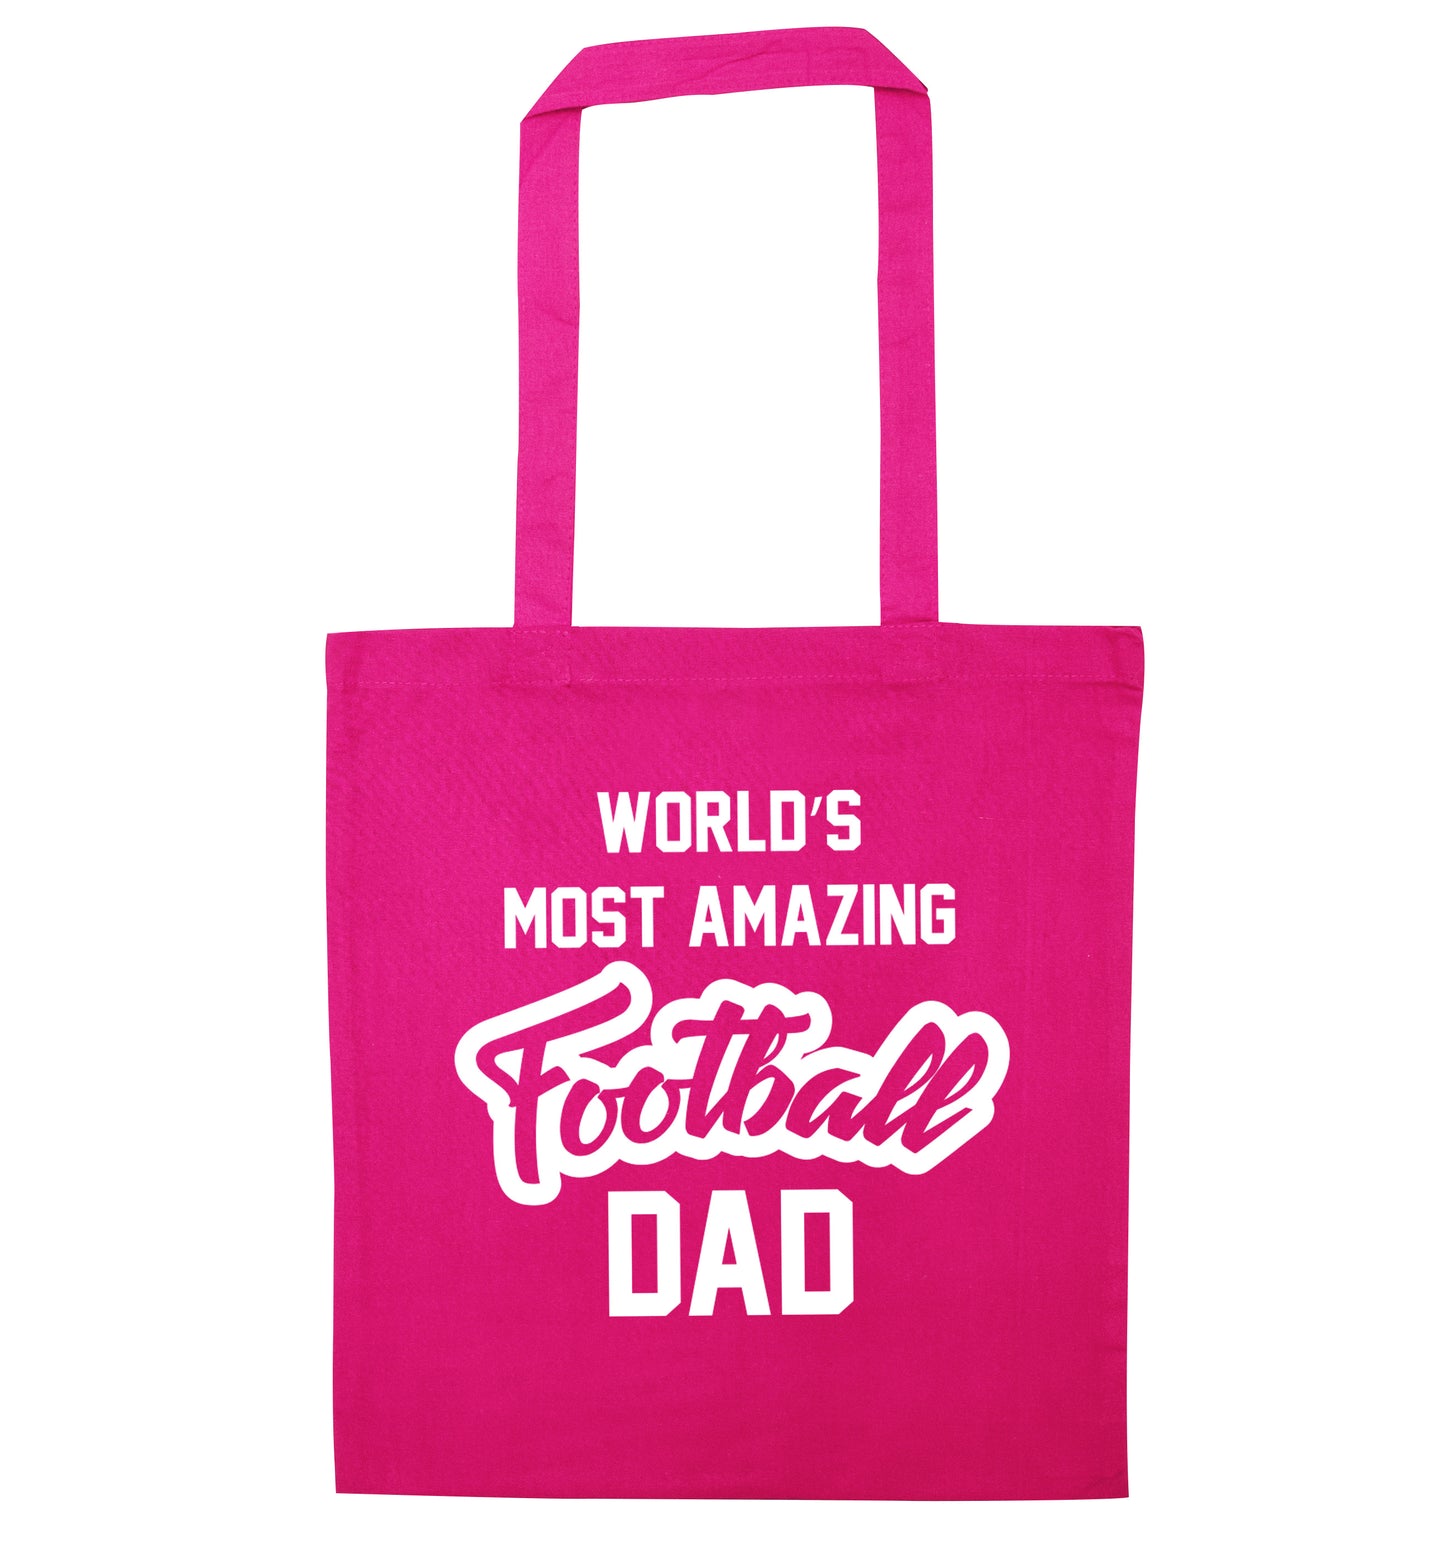 Worlds most amazing football dad pink tote bag